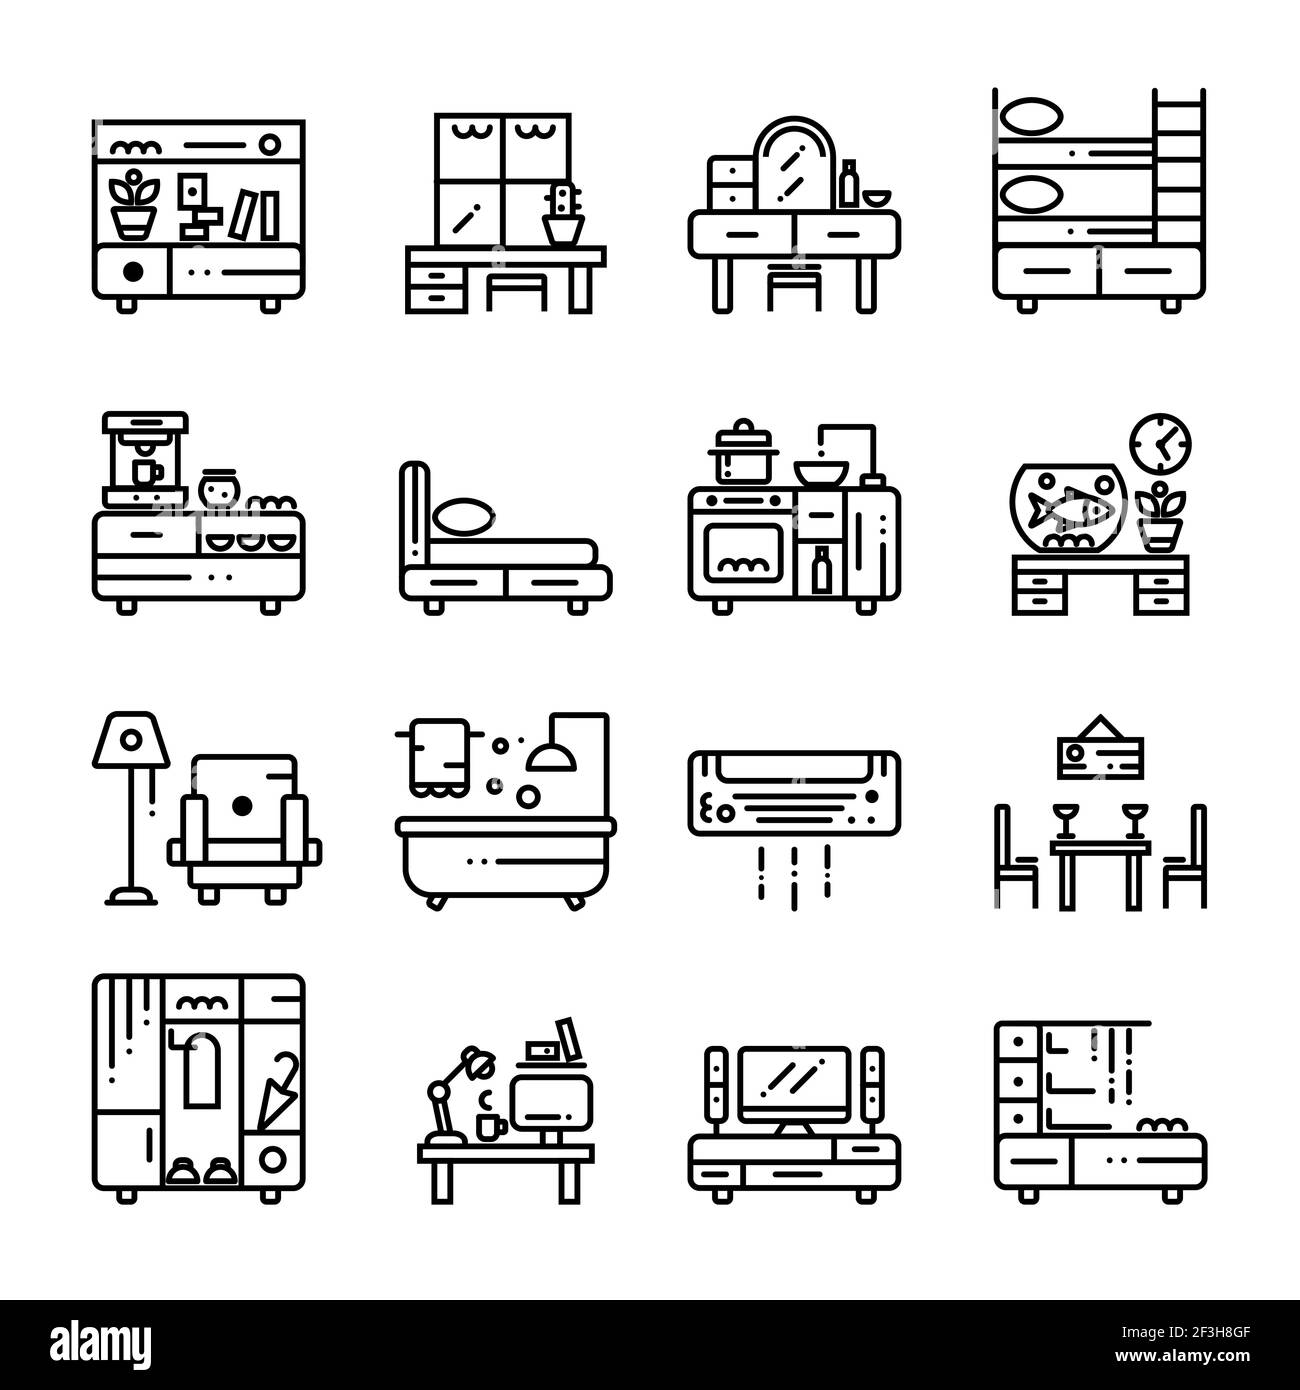 Set of furniture interior icons. Linear style isolated illustrations. Stock Vector